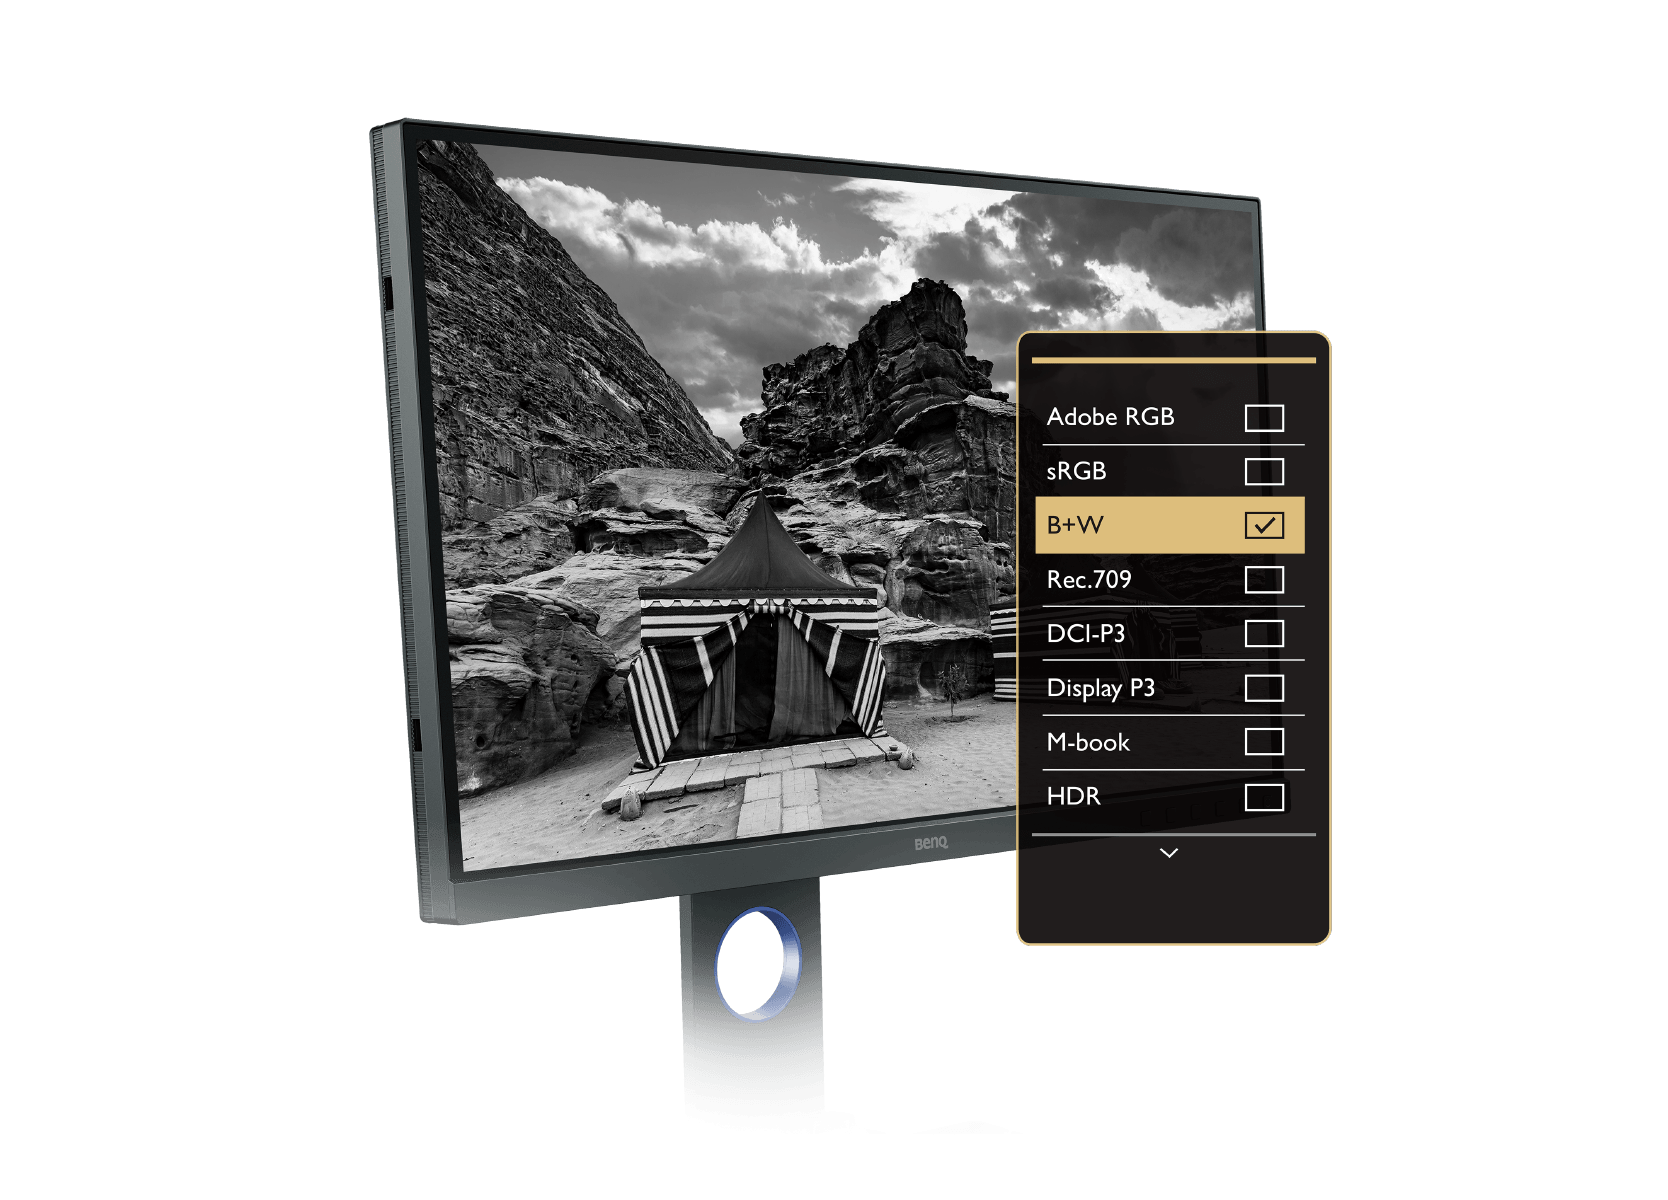 benq photographer monitor provides advanced black & white mode to preview color photos in any of three preset black and white settings before editing